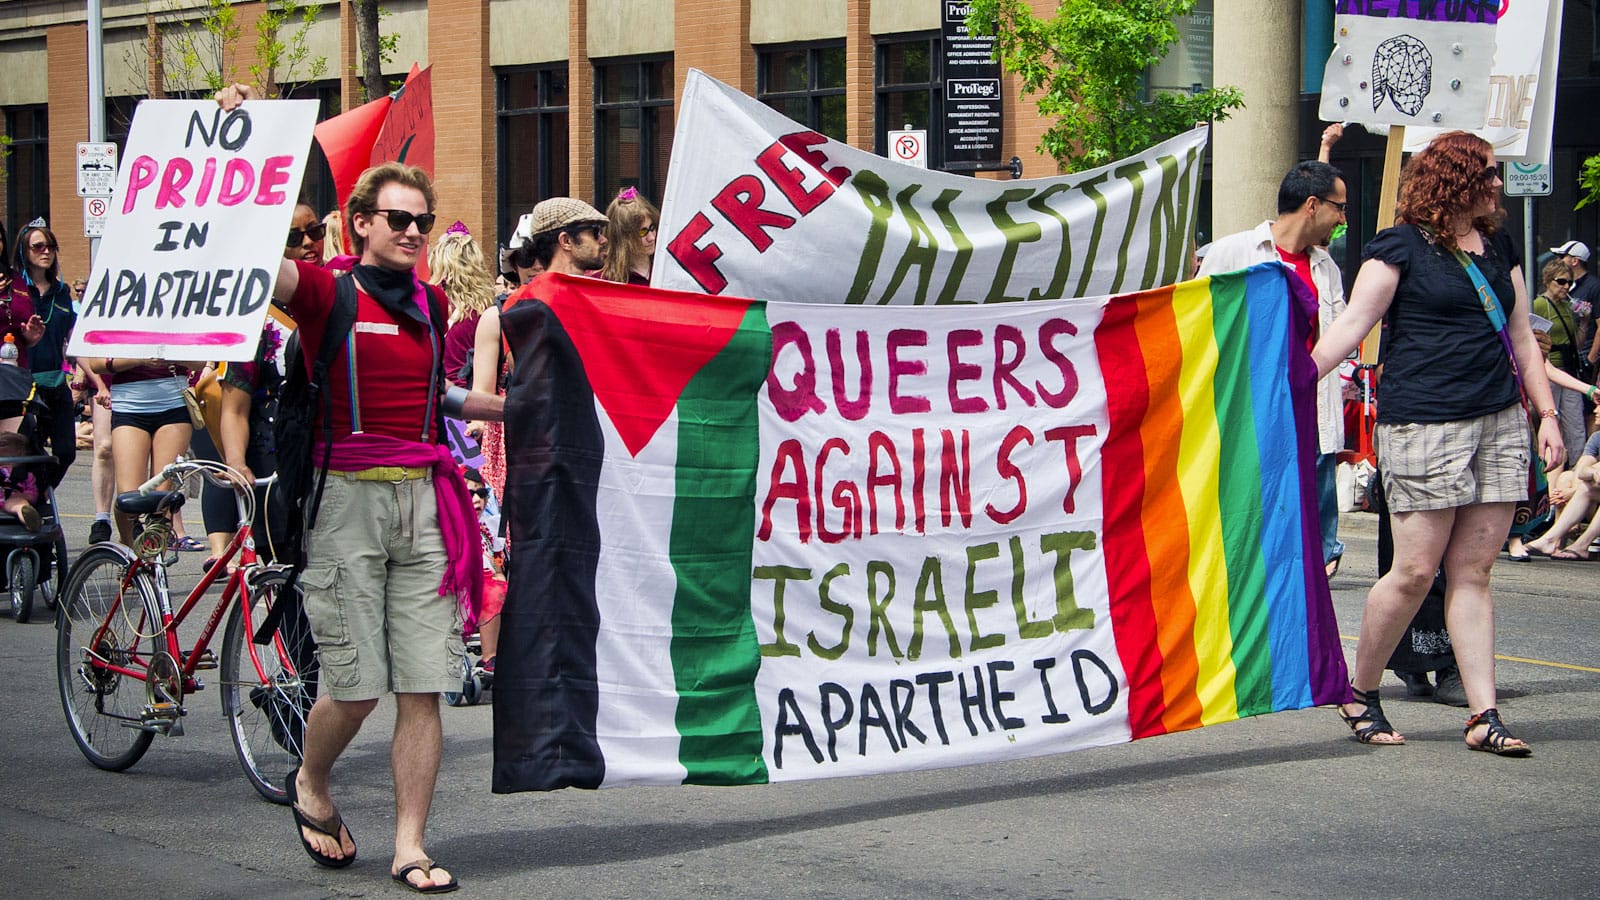 Edmonton Pride Parade 2011 photo shows colorful marchers with 'Queers Against Israeli Apartheid' and 'No Pride in Apartheid' banners banner